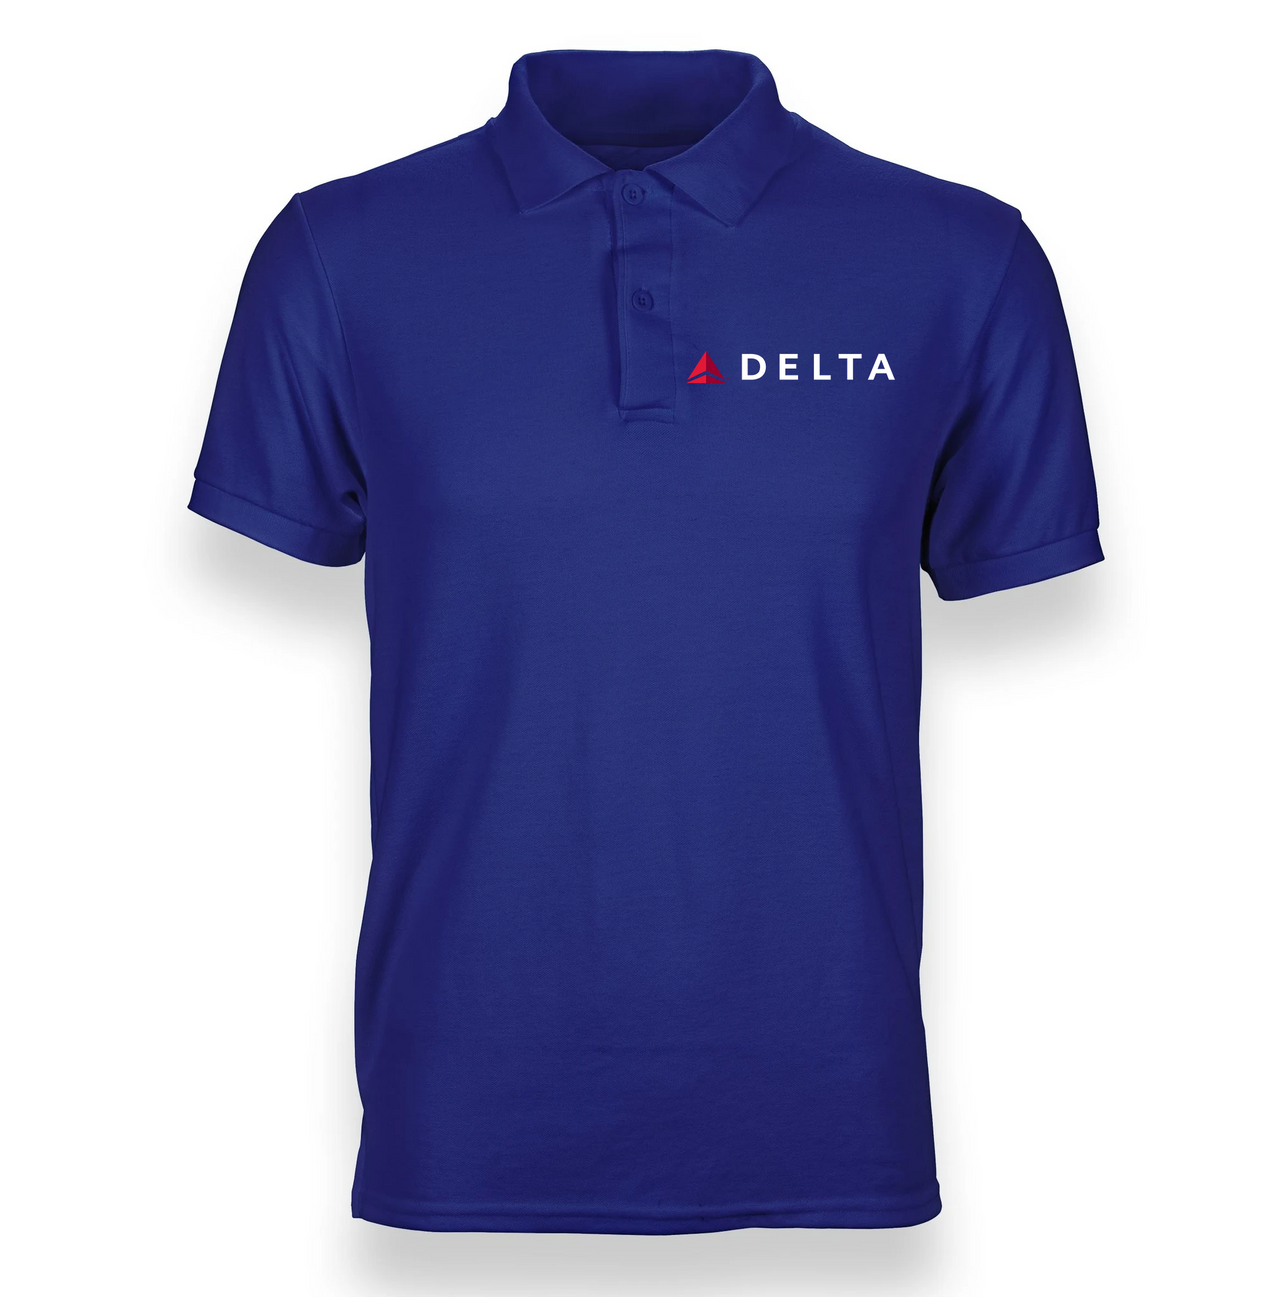 DELTA AIRLINES POLO T-SHIRT